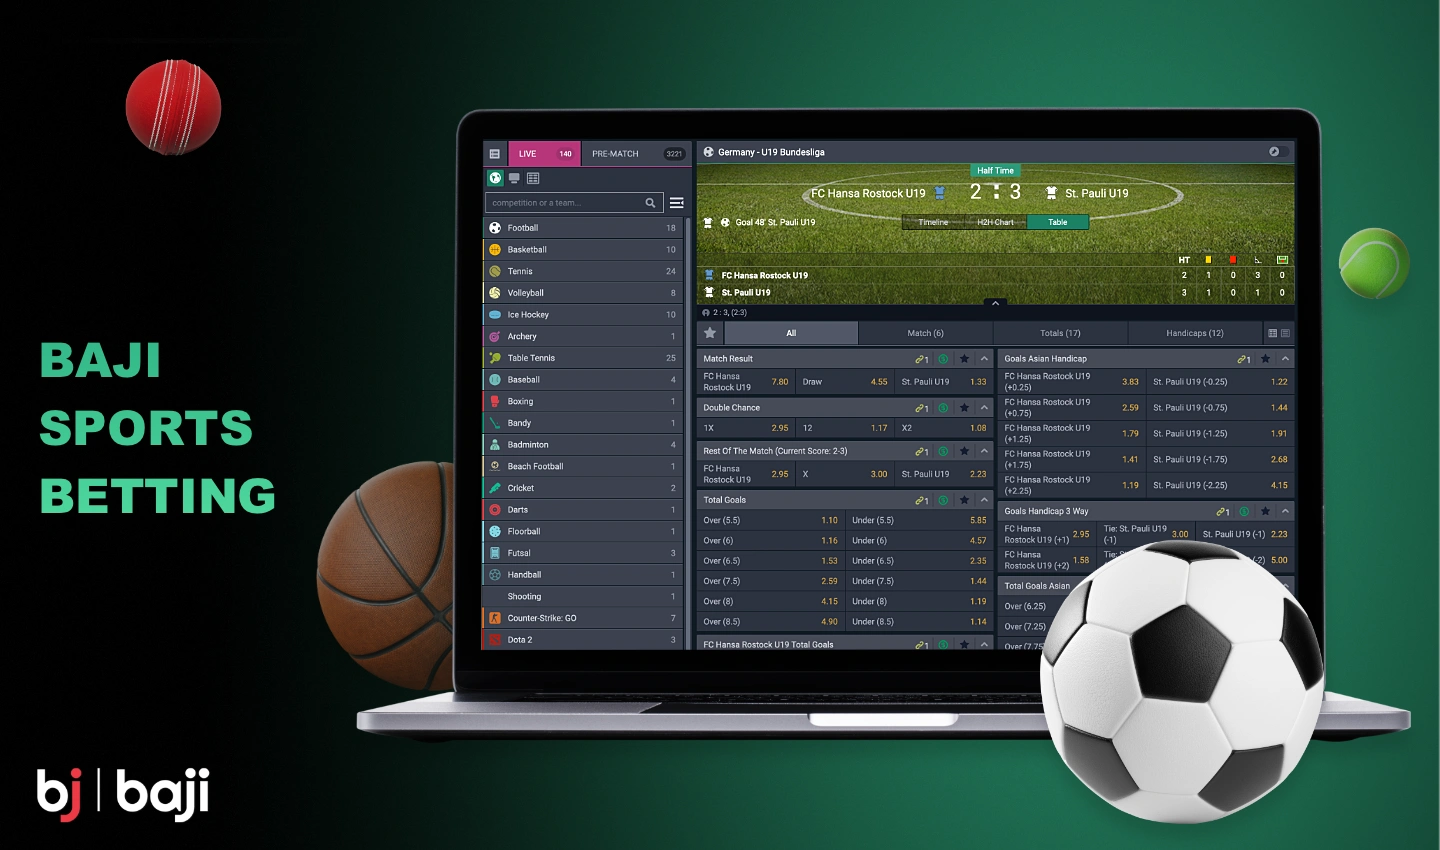 The sports betting section at Baji contains dozens of sports that registered users can bet on